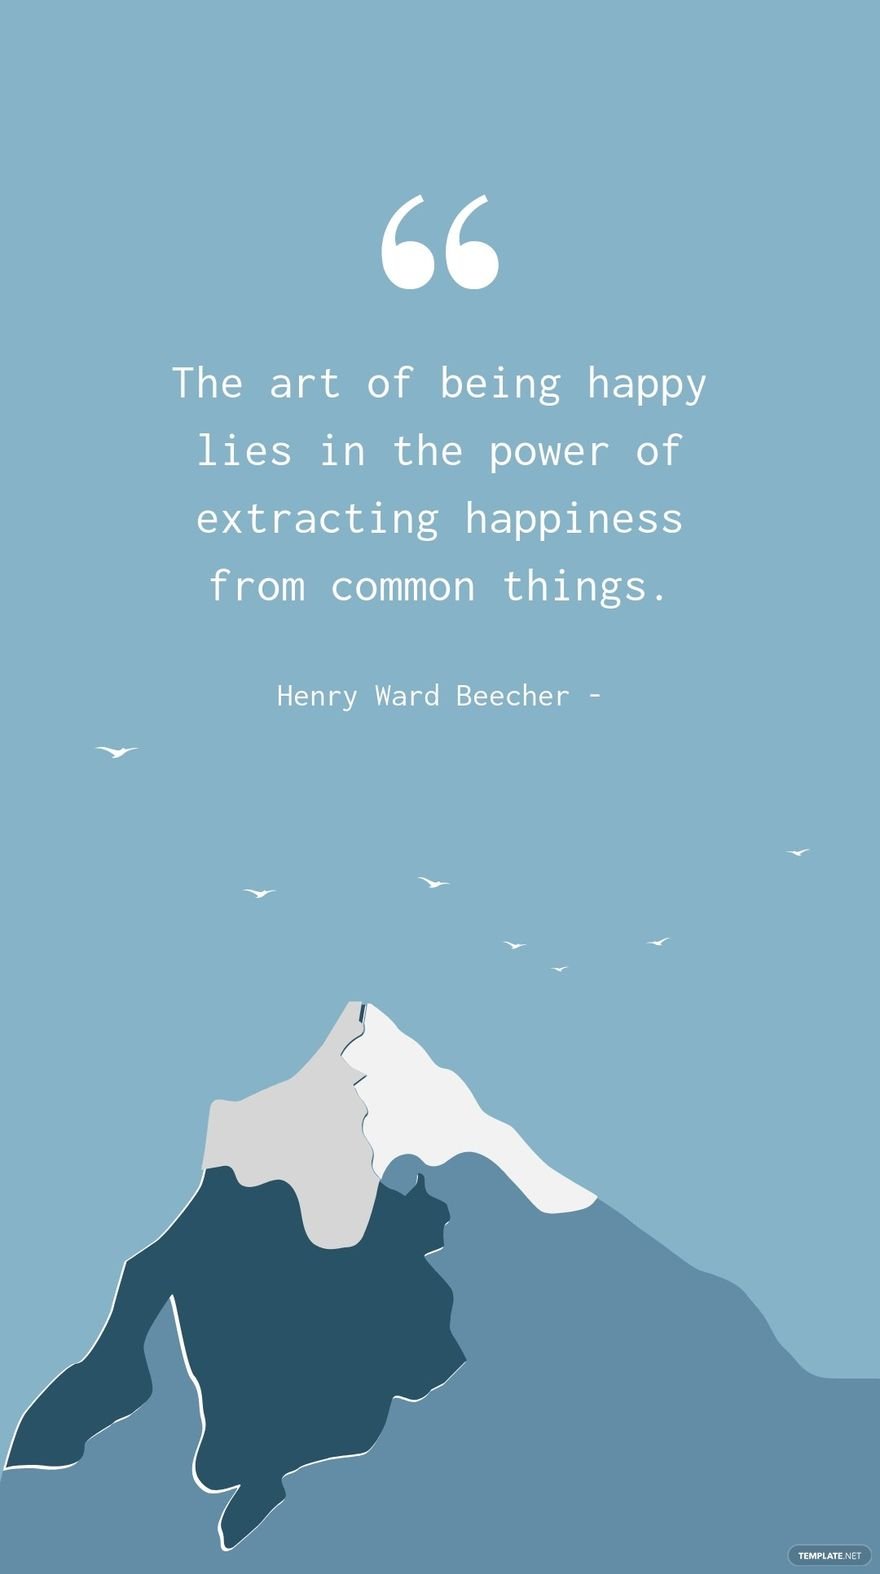 Free Henry Ward Beecher - The art of being happy lies in the power of extracting happiness from common things. in JPG